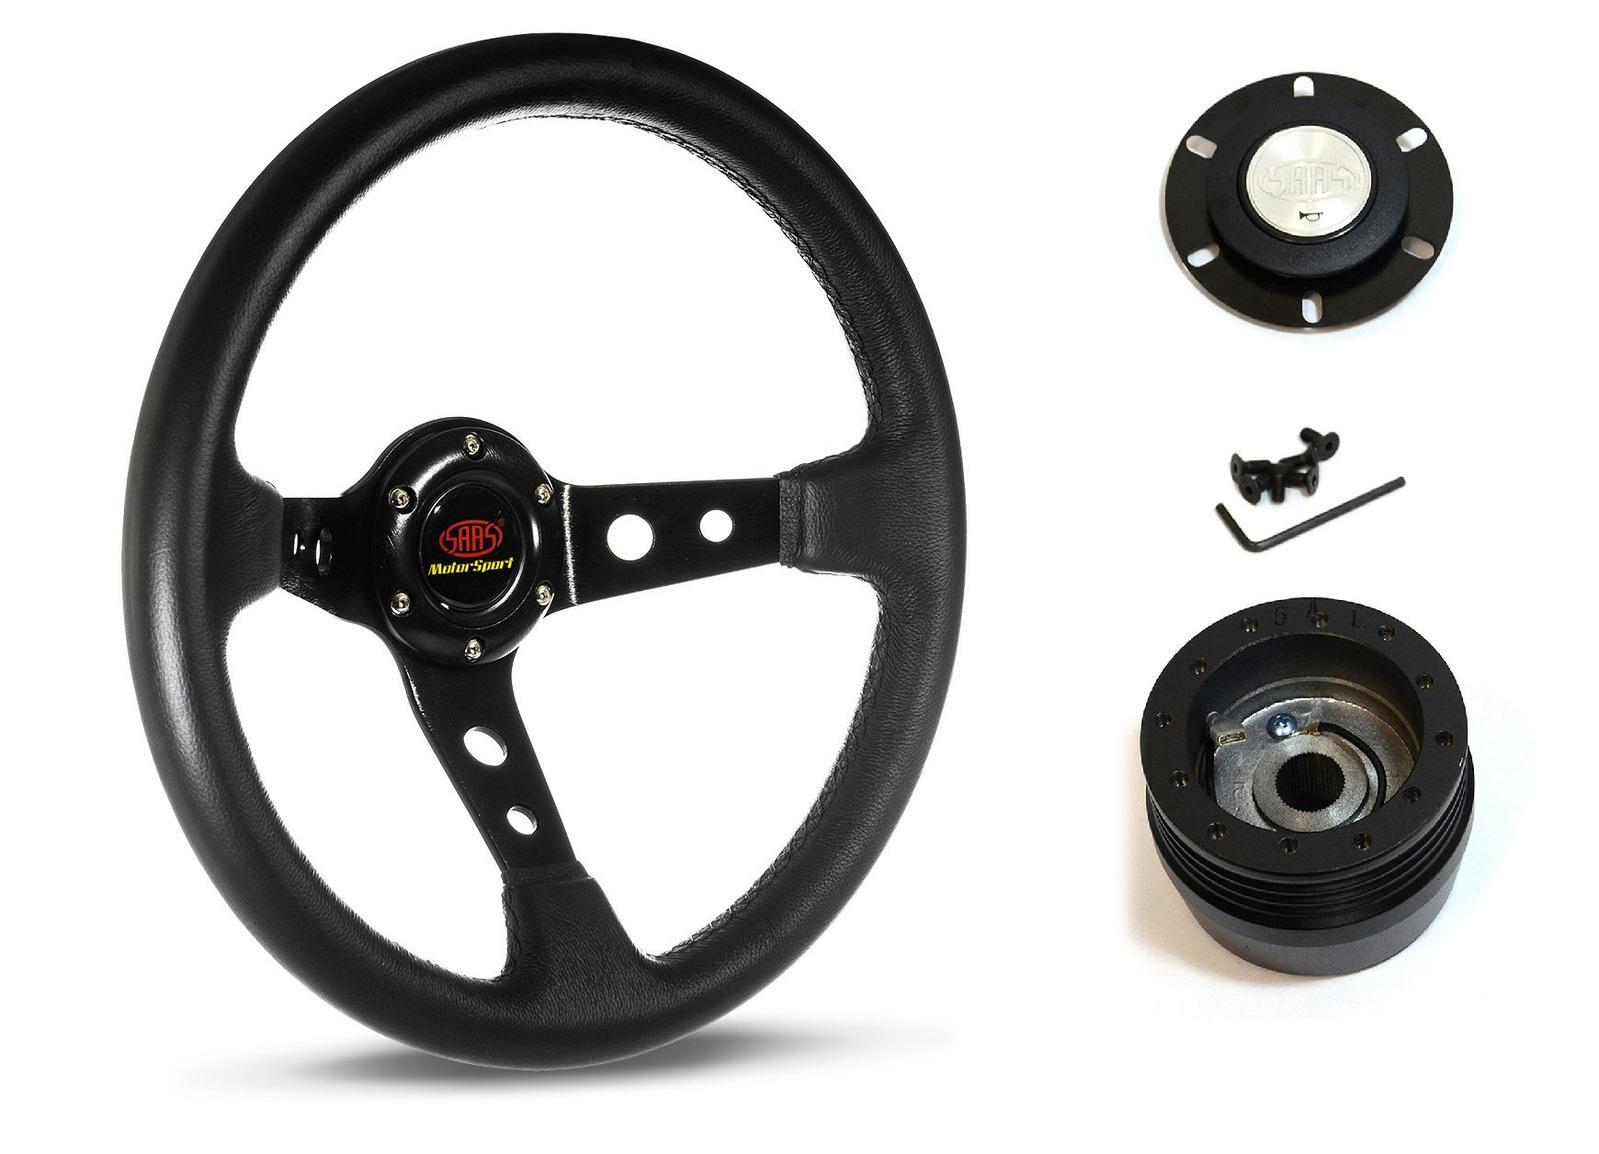 SAAS Steering Wheel Leather 14" ADR GT Deep Dish Black With Holes SWGT3 and SAAS boss kit for Nissan Silvia S13 1987-1992